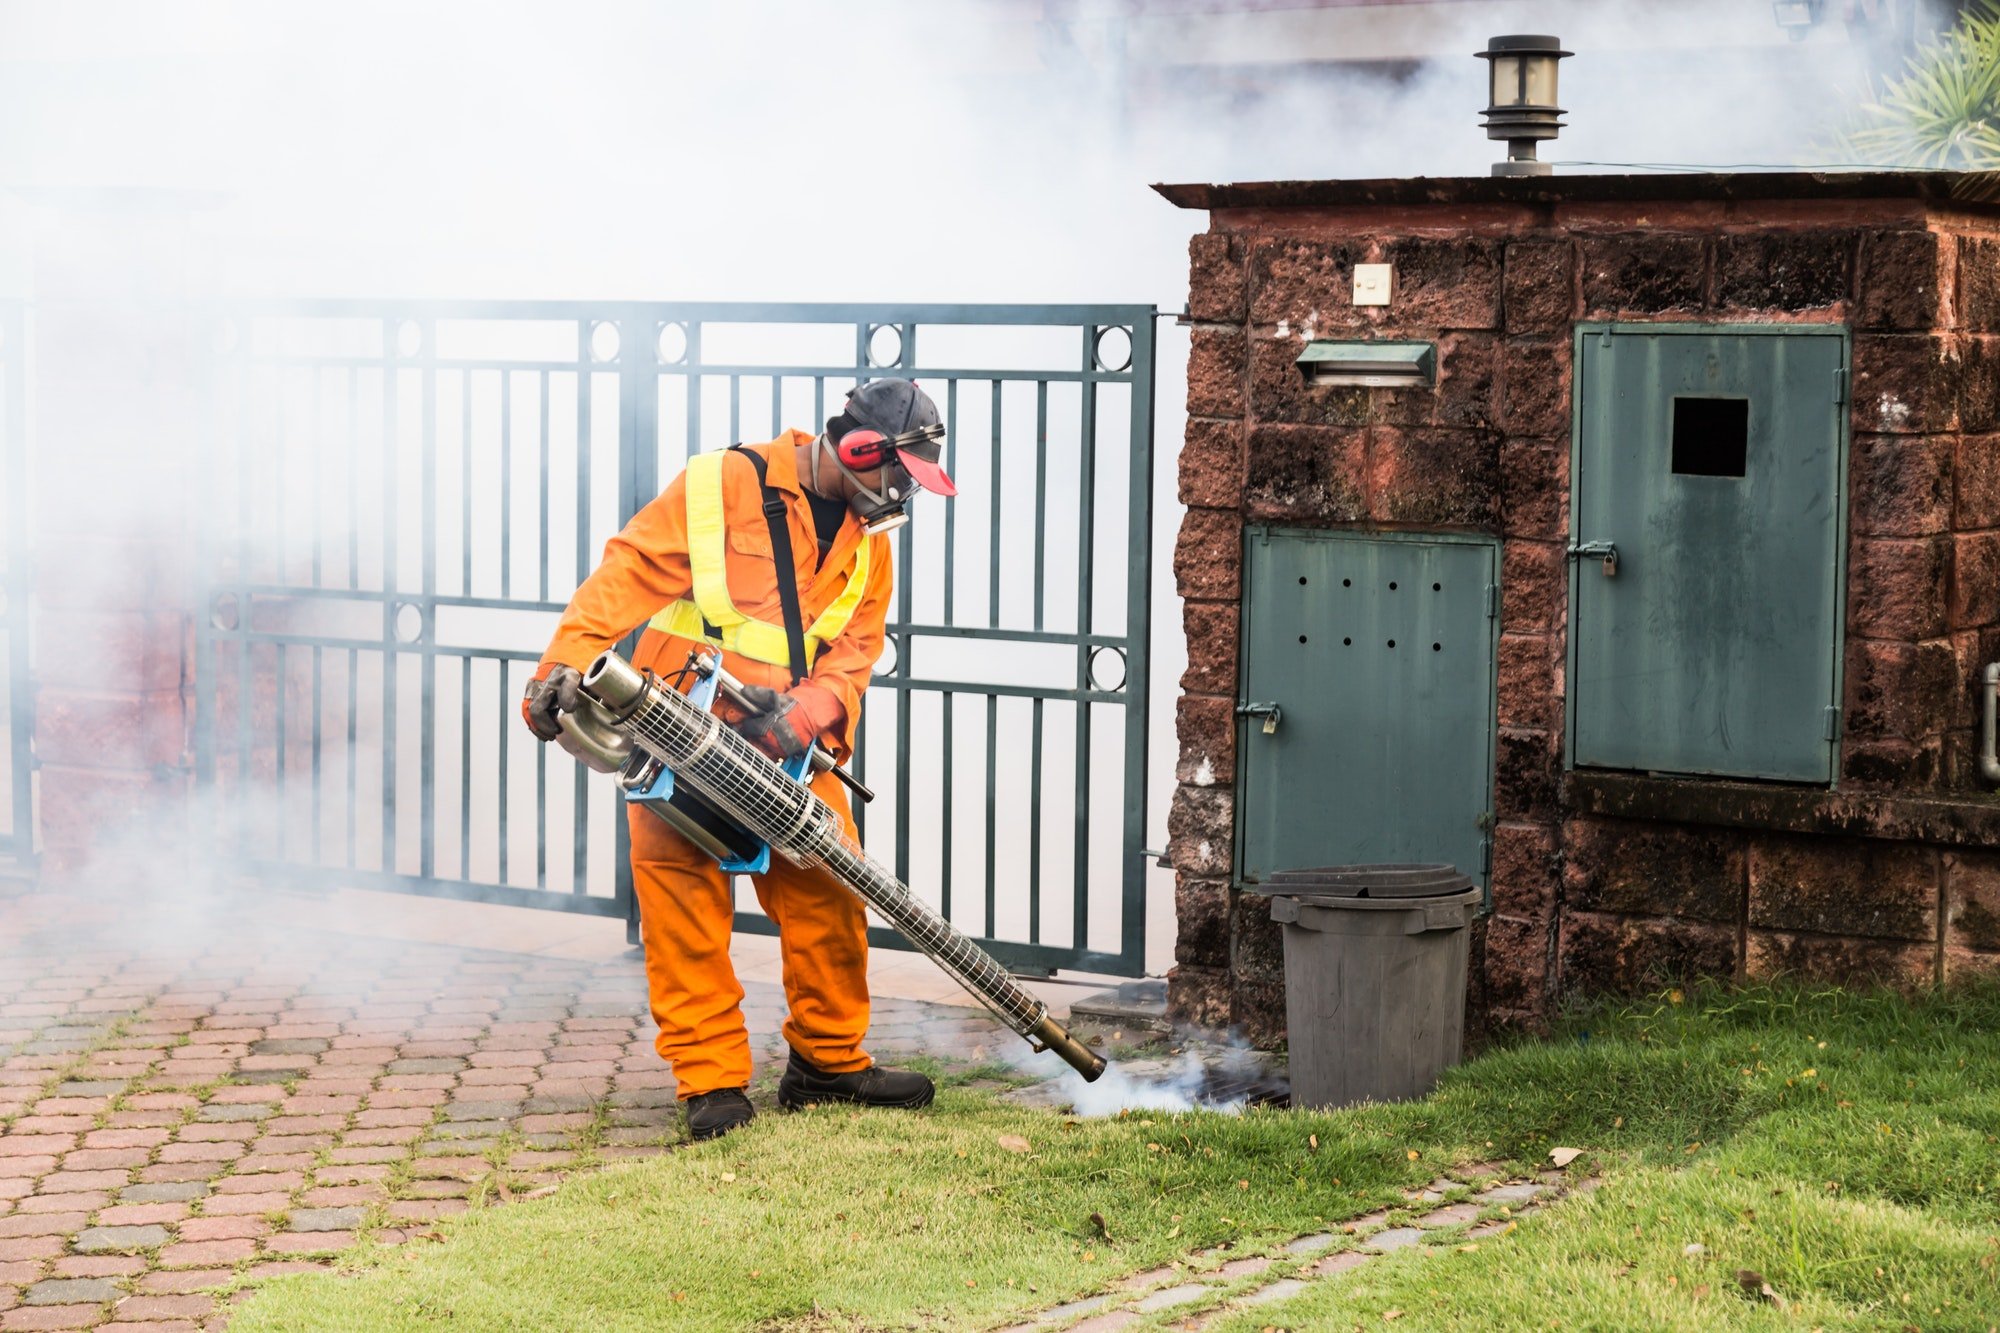 Worker fogging residential area with insecticides to kill aedes